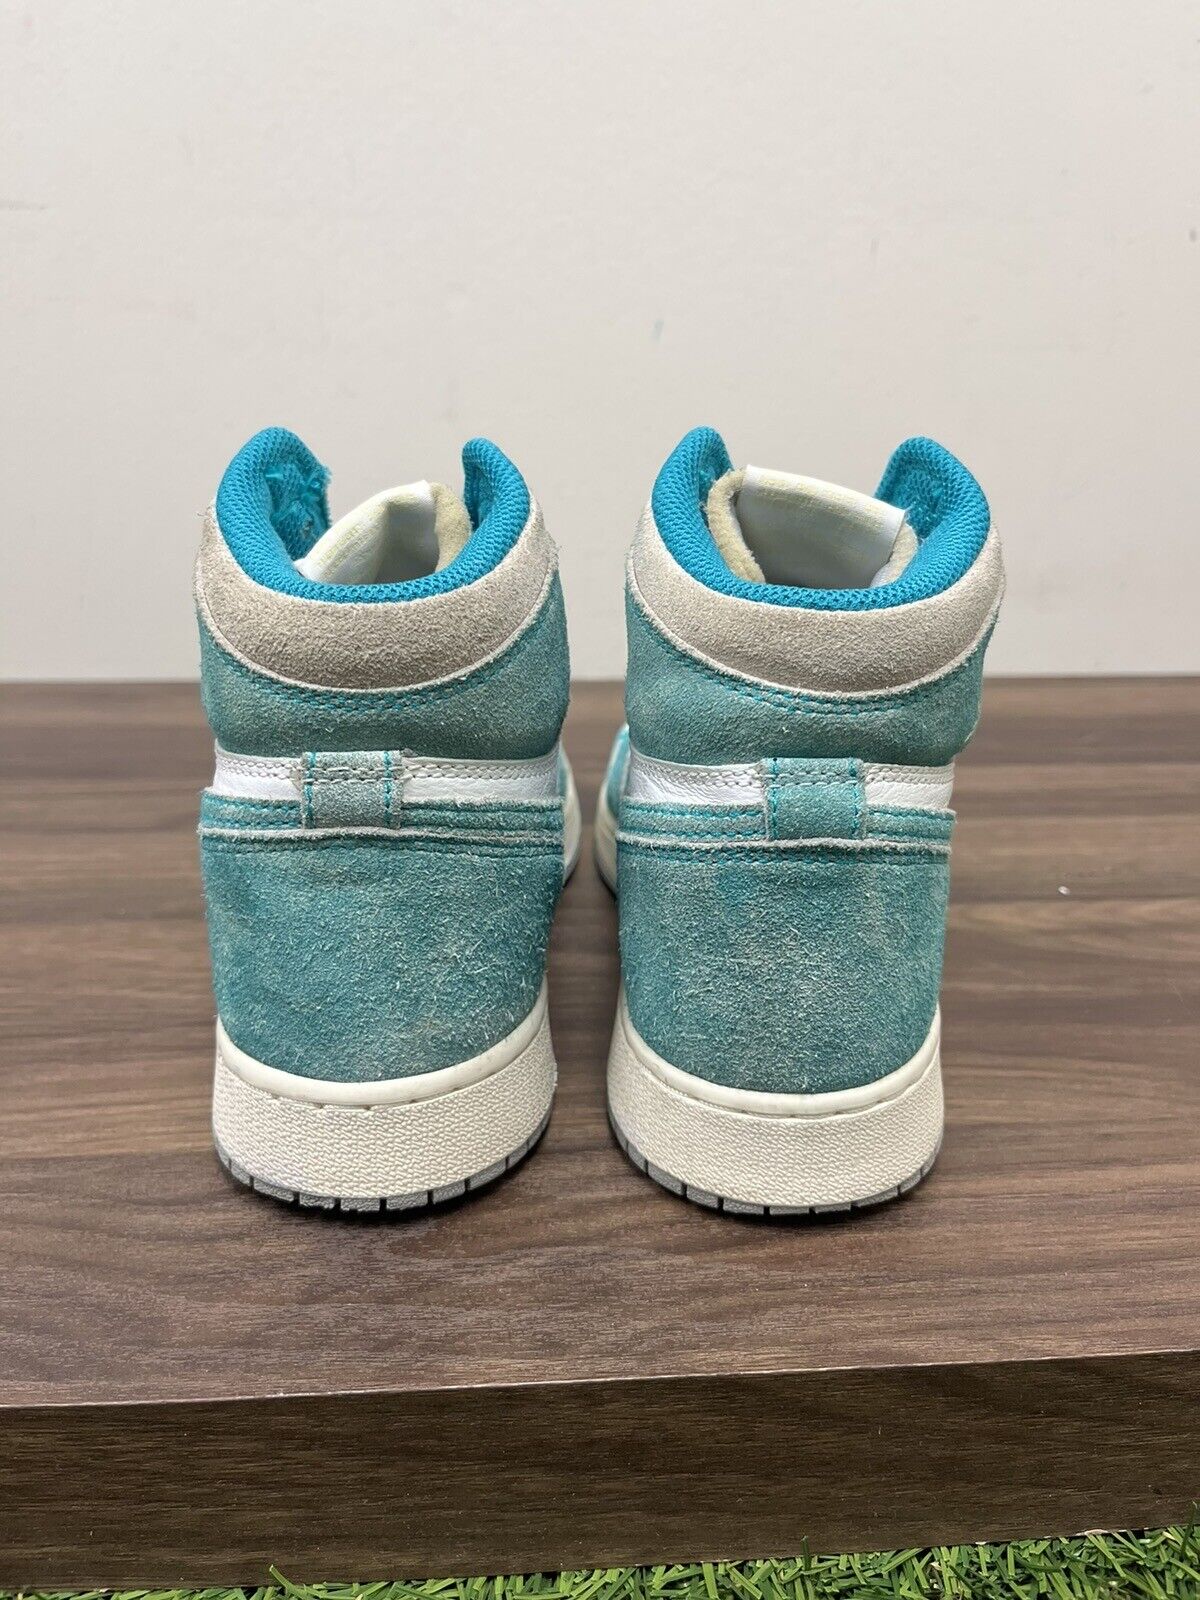 Air Jordan 1 High OG Turbo Green GS - Size 6.5Y - - Used - Youth Shoe